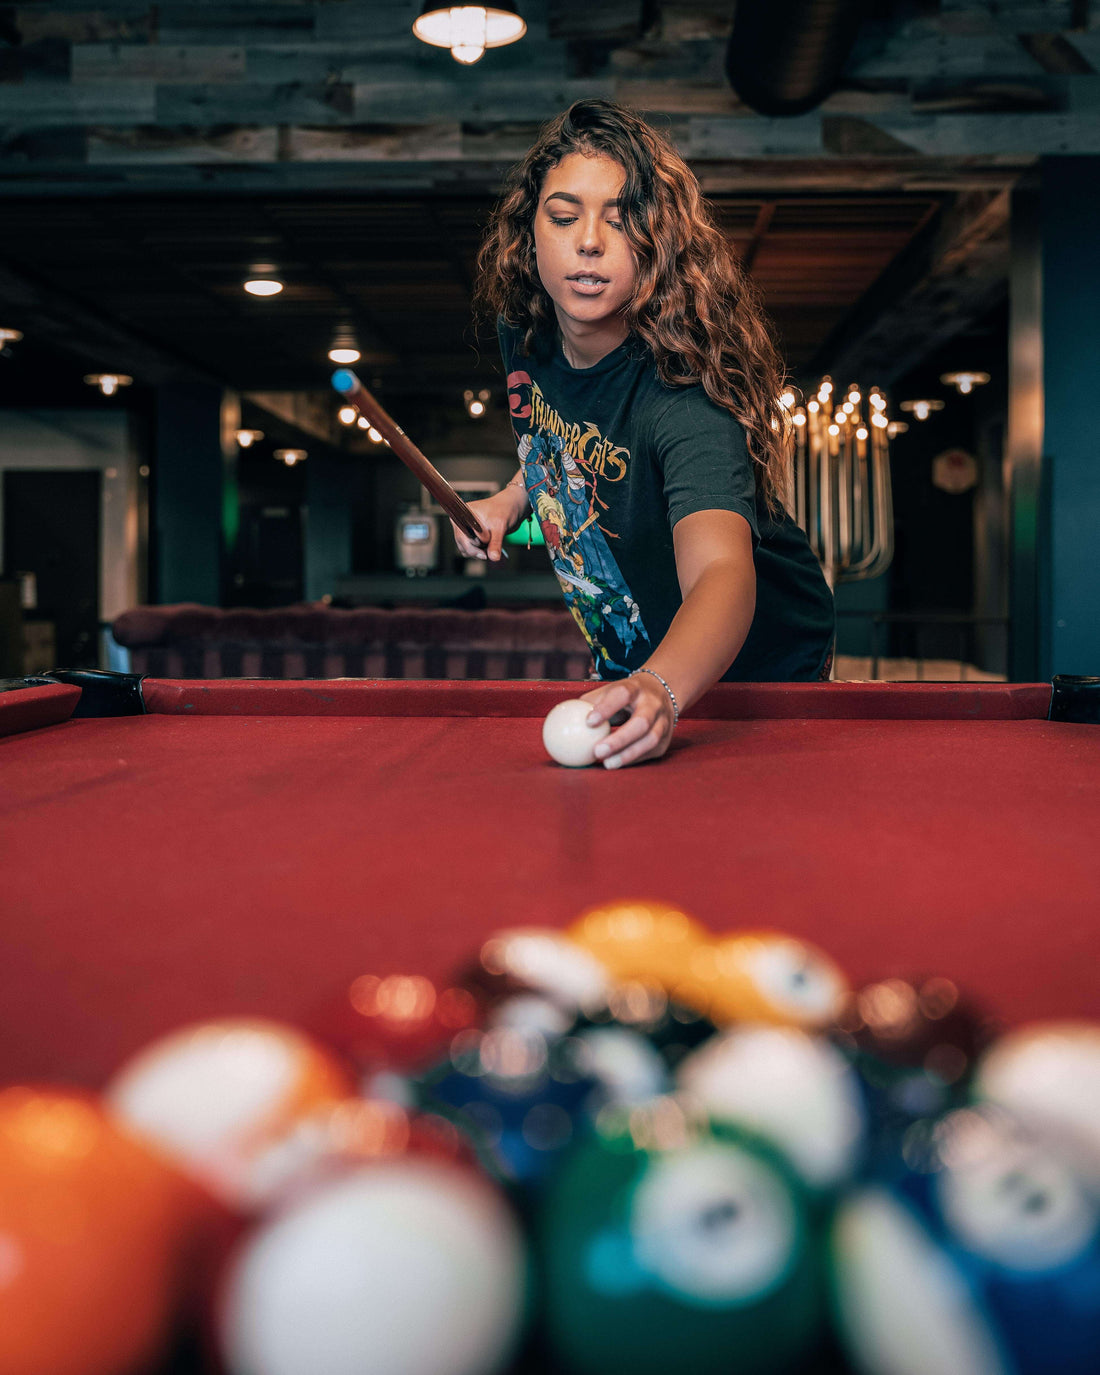  Everything You Need to Know When Choosing a Pool Table